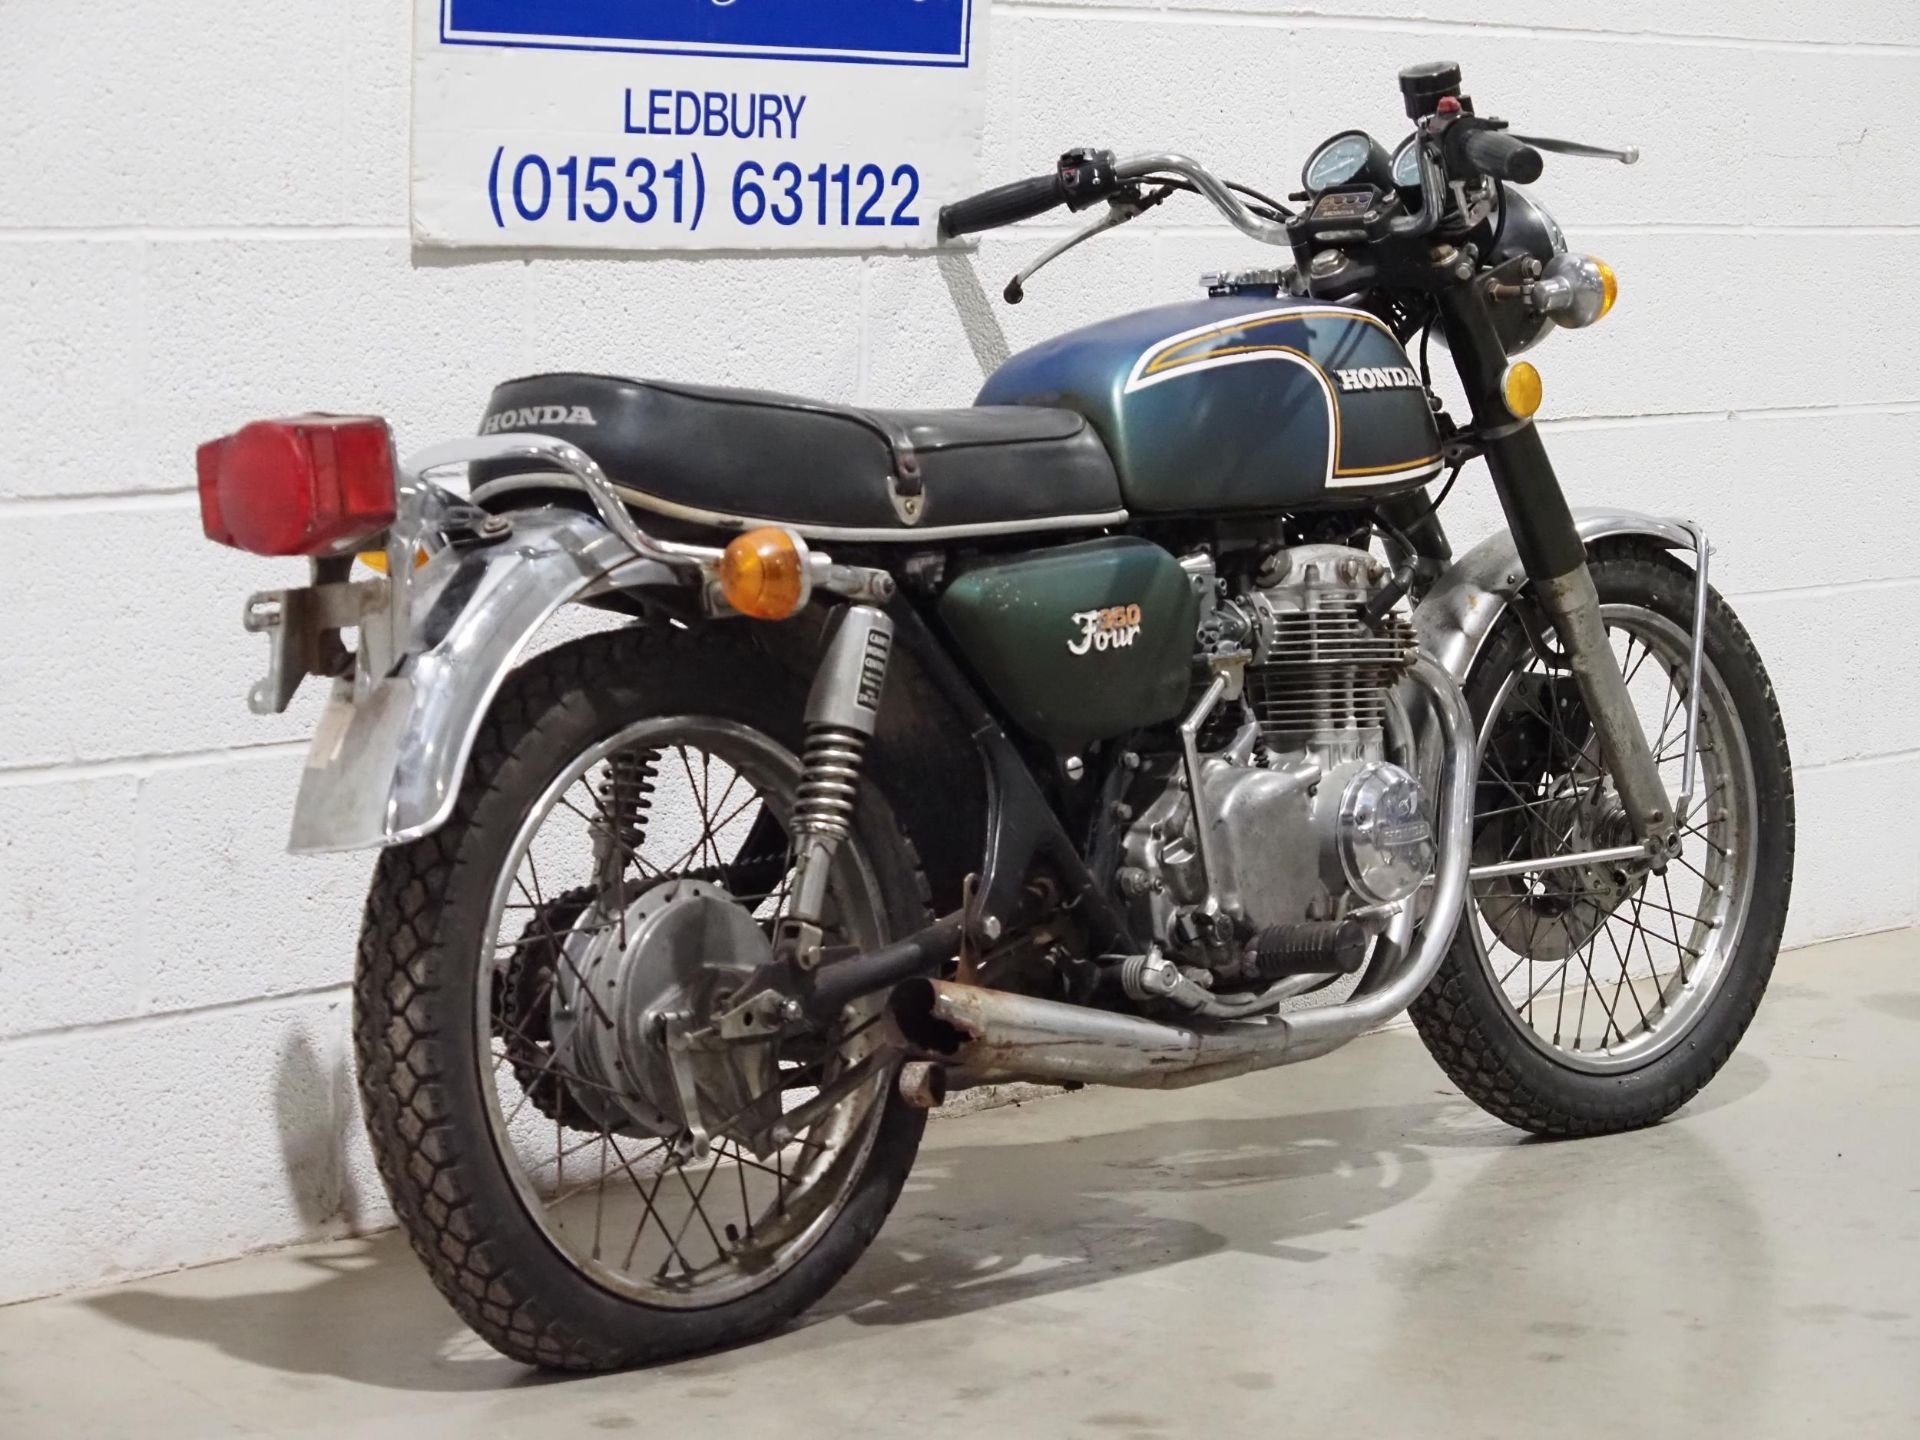 Honda CB350F motorcycle. 1972. Frame No. 1025955 Engine No. CB350FE-1026008 Engine turns over with - Image 3 of 7